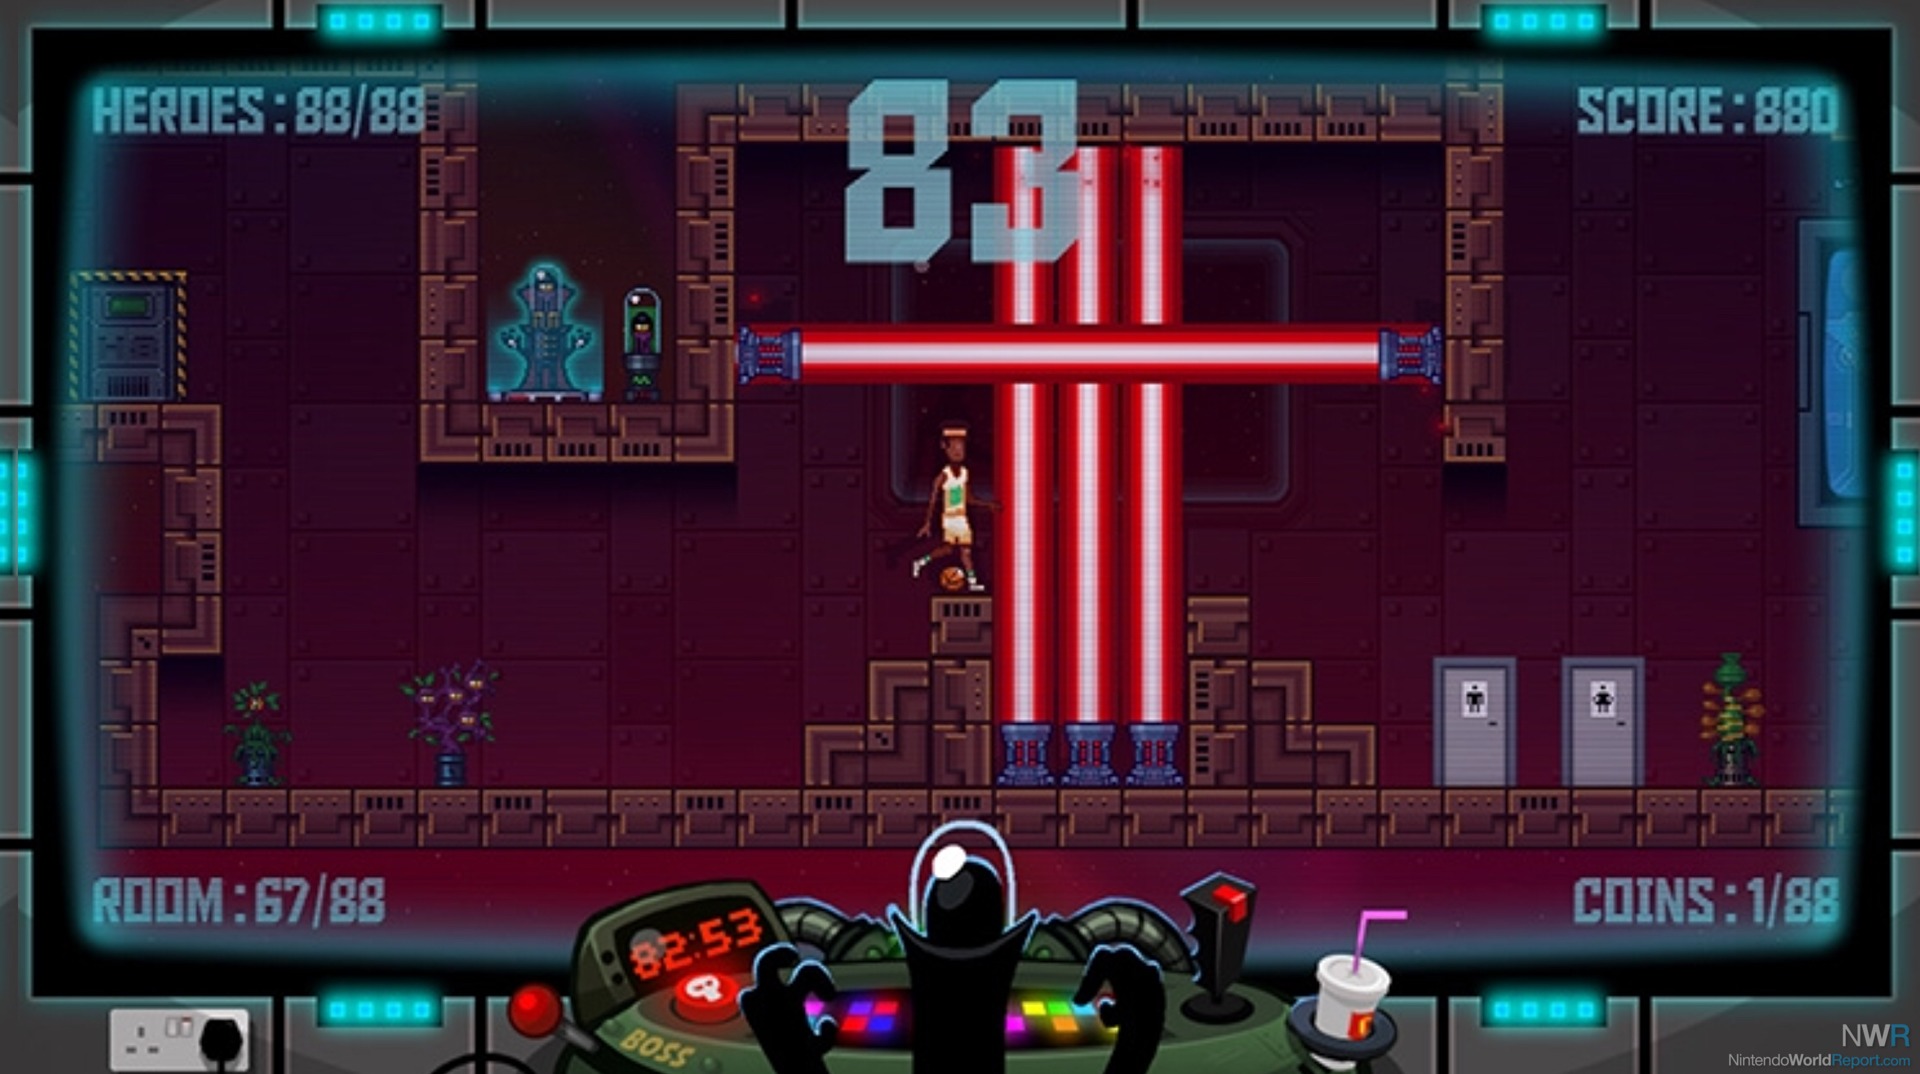 88 Heroes: 98 Heroes Edition Review - Review - Nintendo World Report